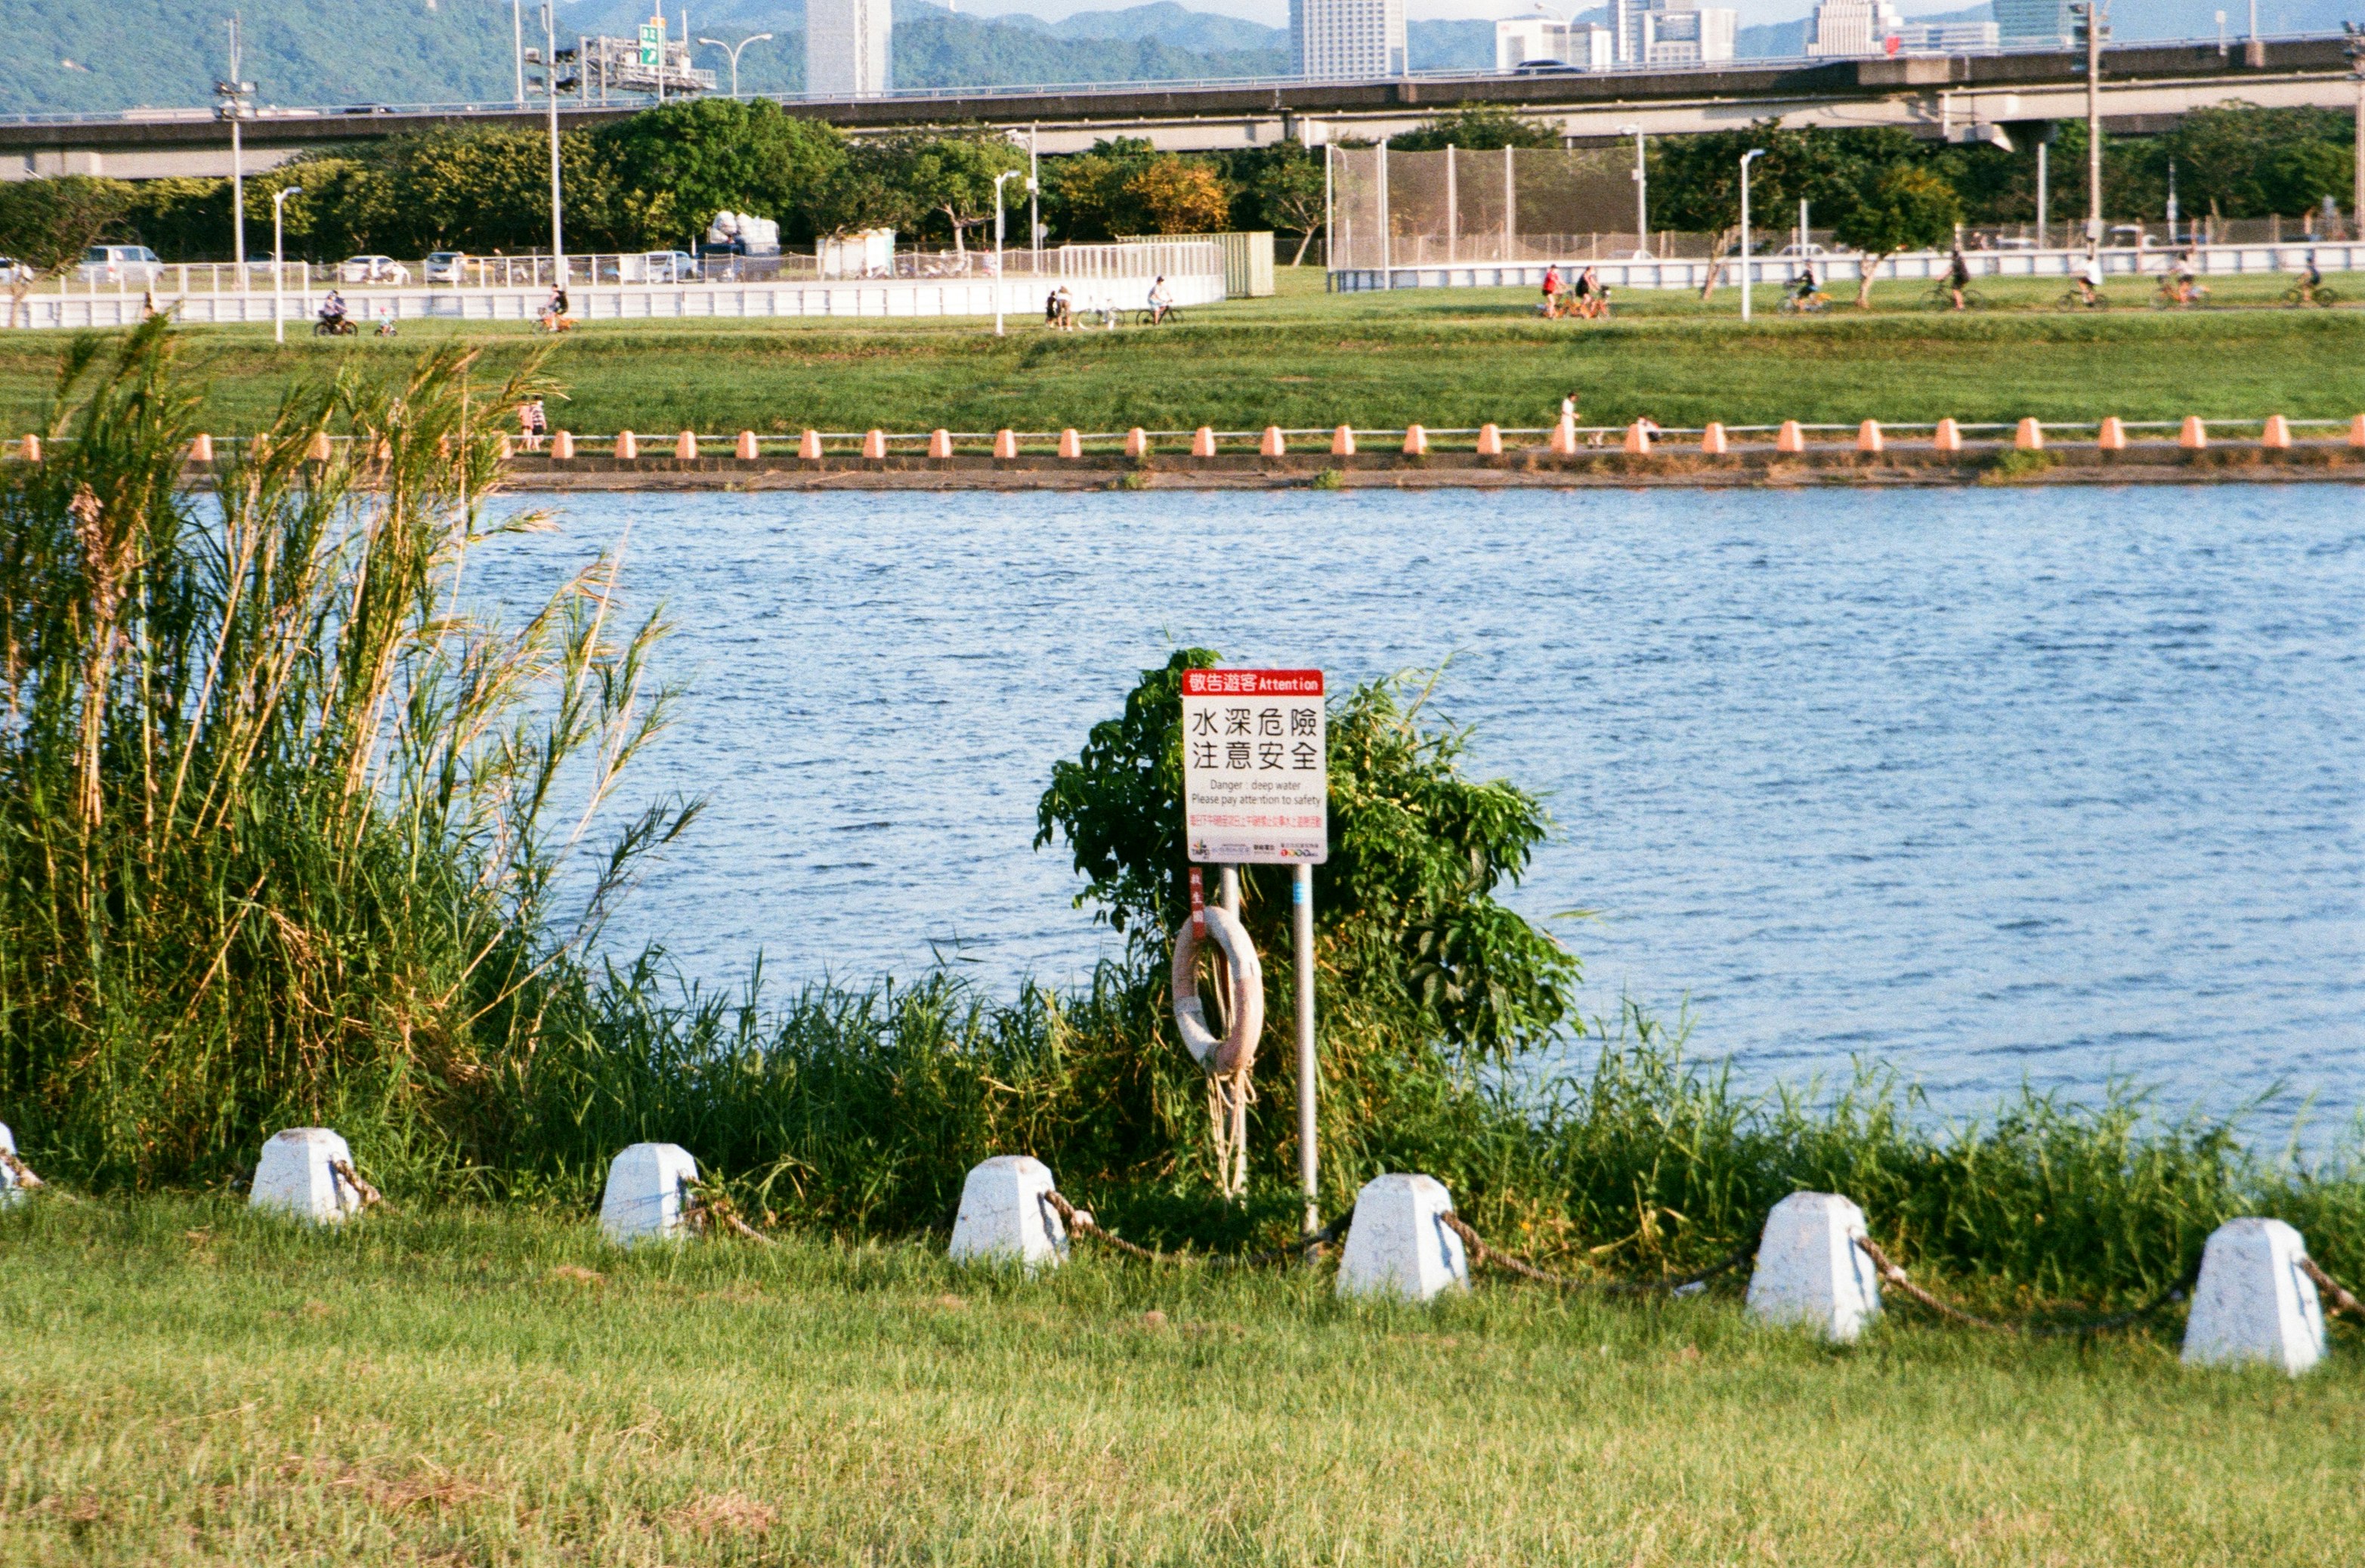 red and white metal signage near body of water during daytime